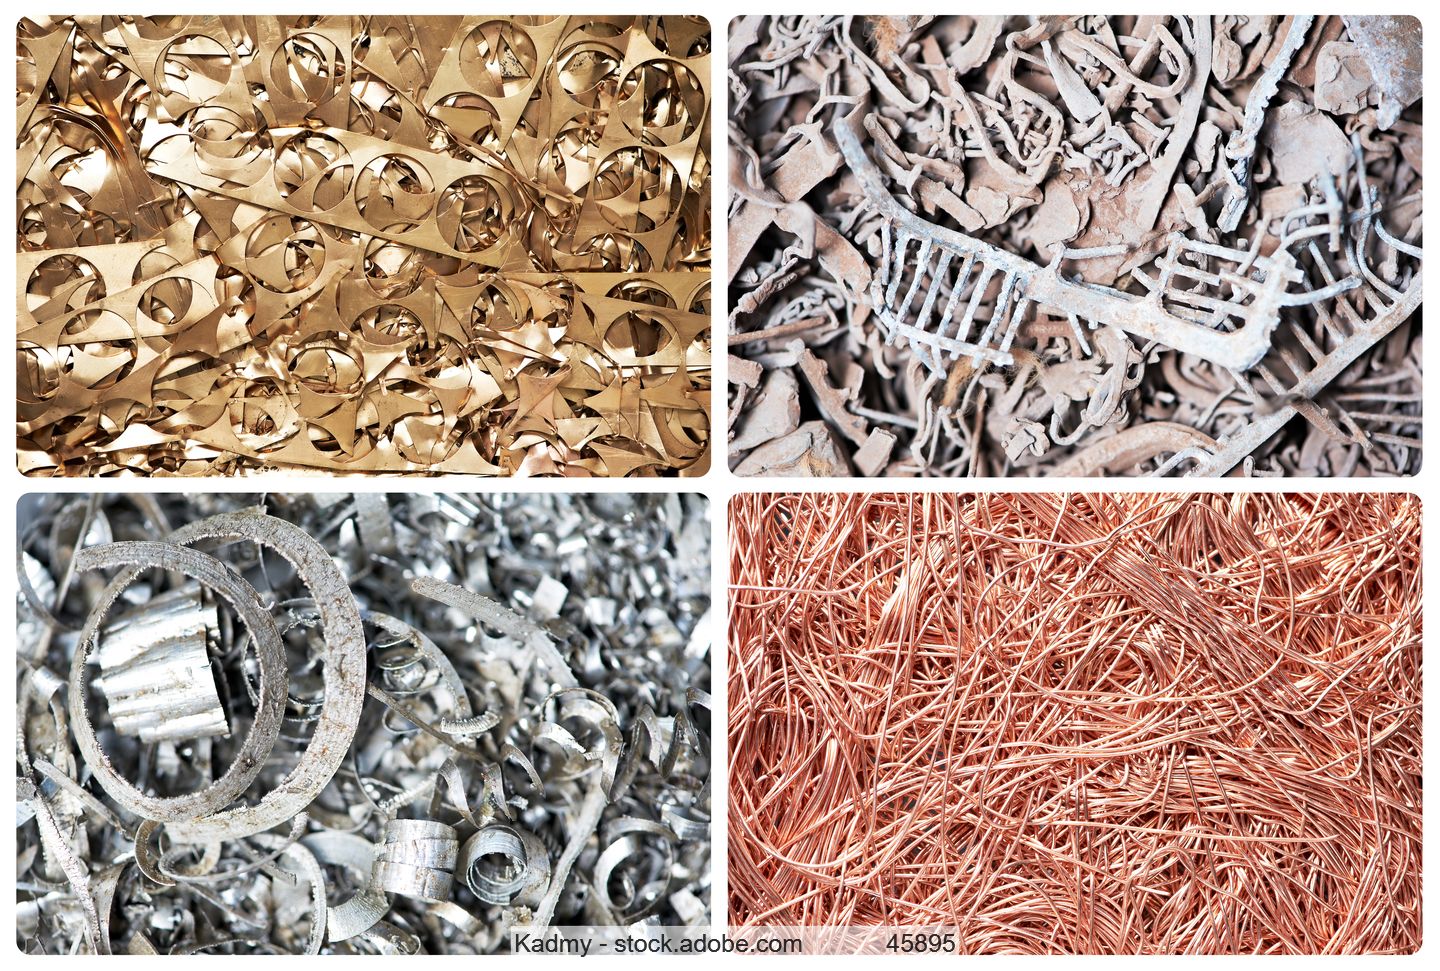 image divided into four fields showing different non-ferrous scrap metals